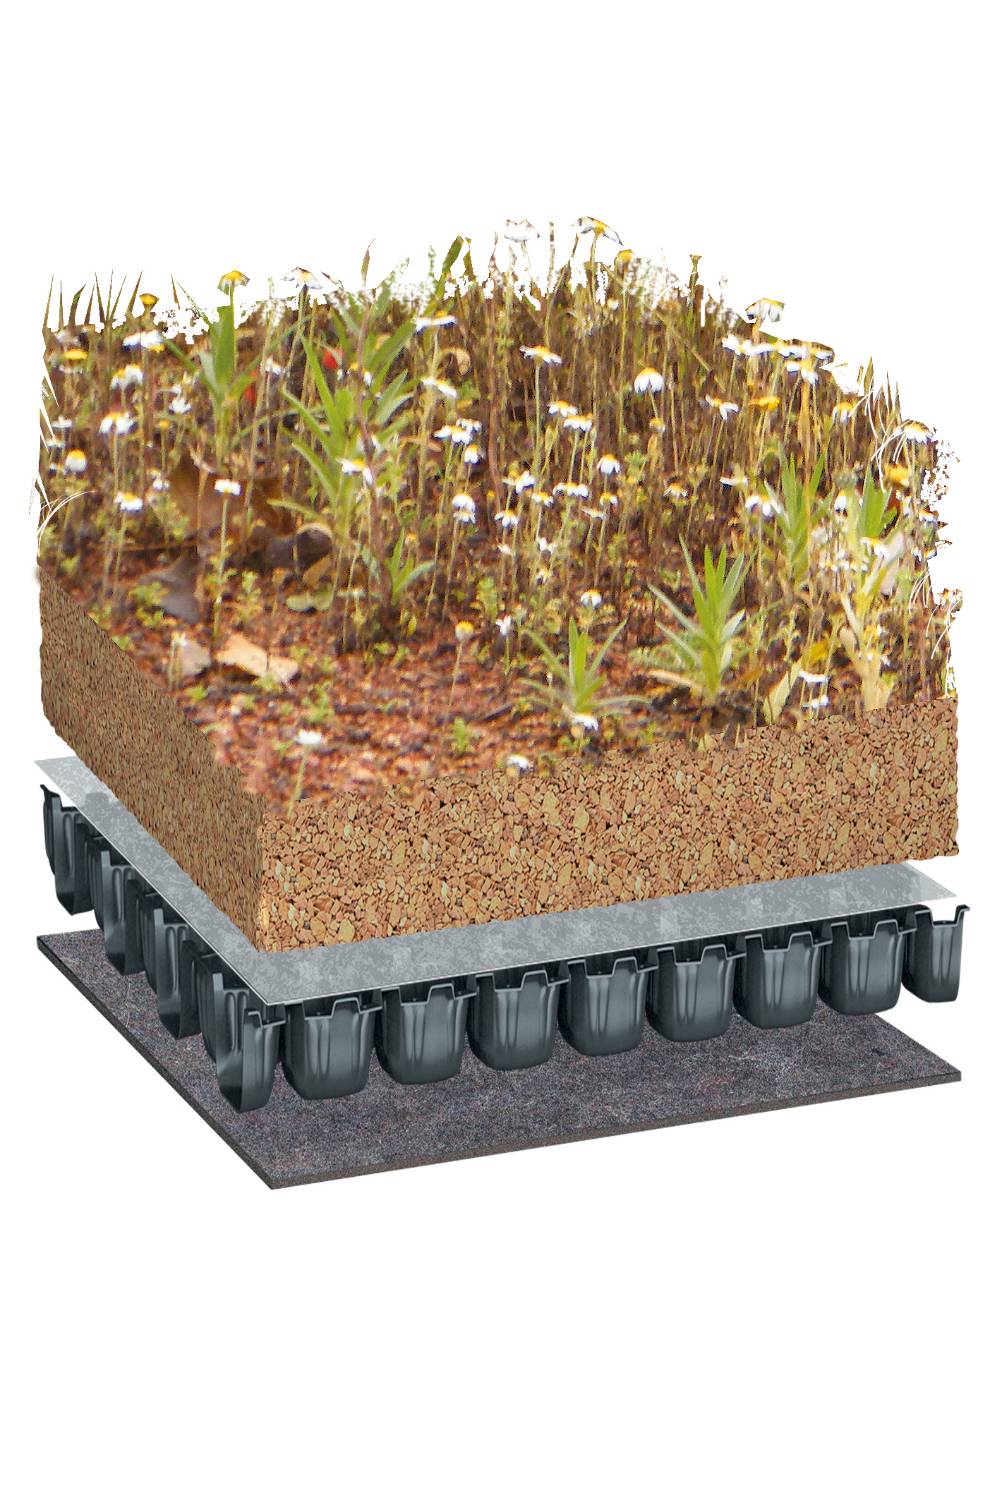 Bauder Flora Seed Mix Biodiverse Green Roof System, Flat Roof